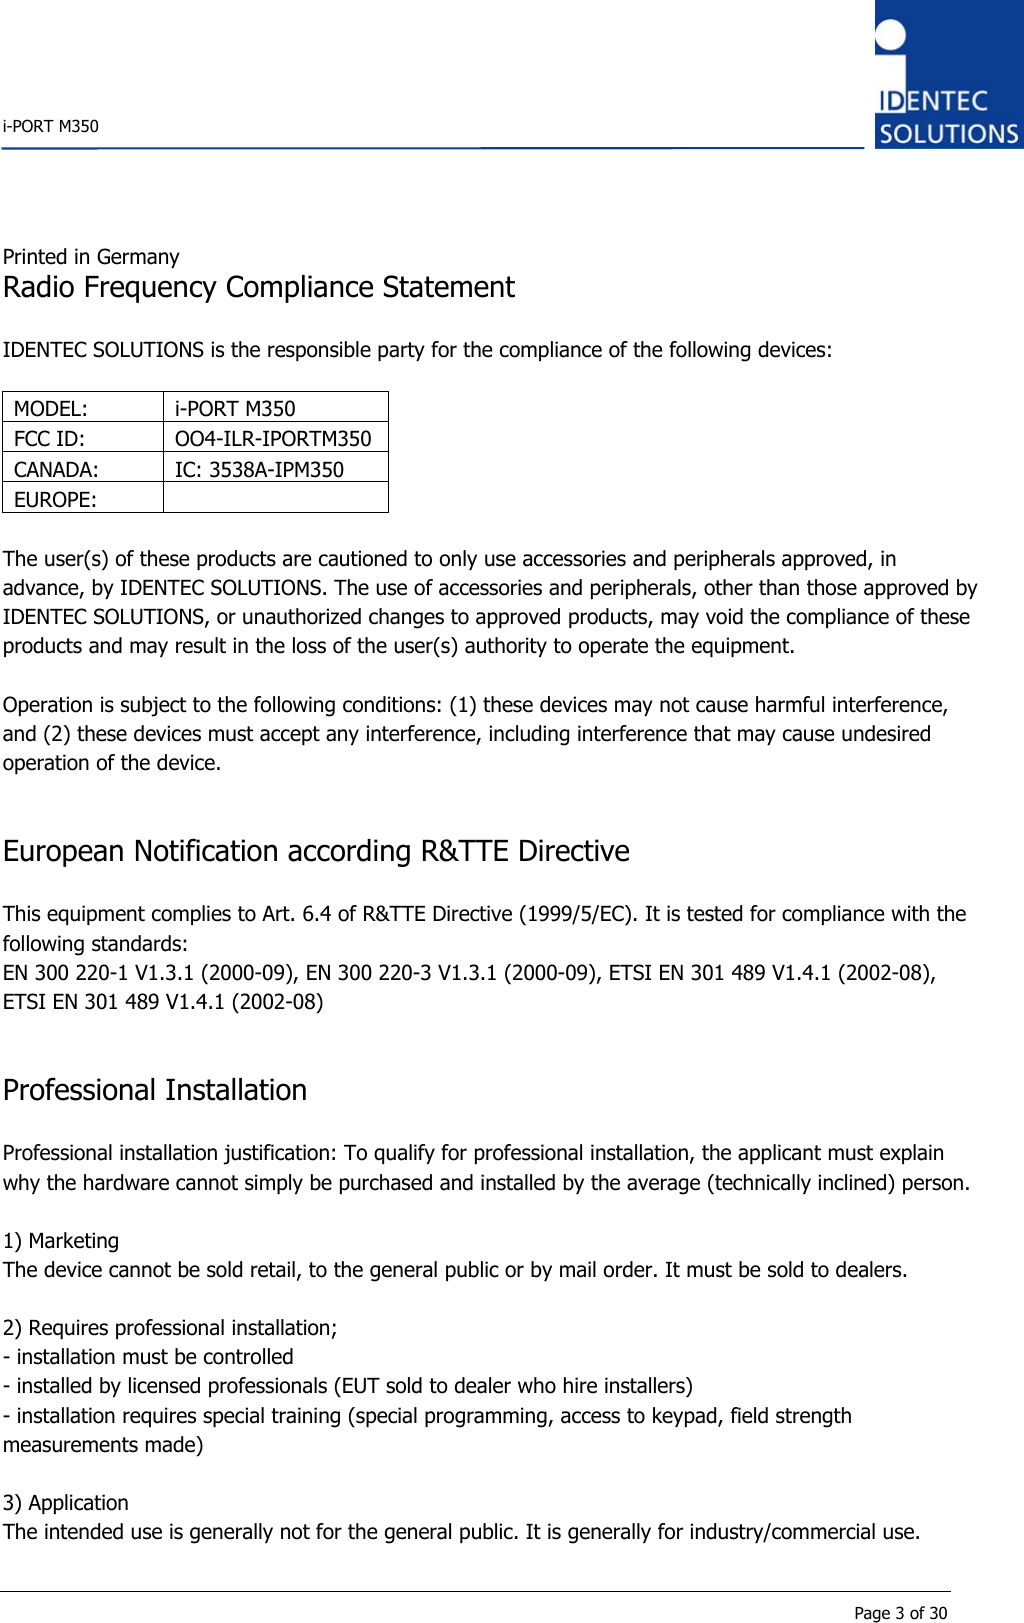    i-PORT M350       Page 3 of 30 Printed in Germany Radio Frequency Compliance Statement  IDENTEC SOLUTIONS is the responsible party for the compliance of the following devices:  MODEL: i-PORT M350 FCC ID:  OO4-ILR-IPORTM350 CANADA: IC: 3538A-IPM350 EUROPE:   The user(s) of these products are cautioned to only use accessories and peripherals approved, in advance, by IDENTEC SOLUTIONS. The use of accessories and peripherals, other than those approved by IDENTEC SOLUTIONS, or unauthorized changes to approved products, may void the compliance of these products and may result in the loss of the user(s) authority to operate the equipment.  Operation is subject to the following conditions: (1) these devices may not cause harmful interference, and (2) these devices must accept any interference, including interference that may cause undesired operation of the device.   European Notification according R&amp;TTE Directive  This equipment complies to Art. 6.4 of R&amp;TTE Directive (1999/5/EC). It is tested for compliance with the following standards: EN 300 220-1 V1.3.1 (2000-09), EN 300 220-3 V1.3.1 (2000-09), ETSI EN 301 489 V1.4.1 (2002-08), ETSI EN 301 489 V1.4.1 (2002-08)   Professional Installation  Professional installation justification: To qualify for professional installation, the applicant must explain why the hardware cannot simply be purchased and installed by the average (technically inclined) person.  1) Marketing The device cannot be sold retail, to the general public or by mail order. It must be sold to dealers.  2) Requires professional installation; - installation must be controlled - installed by licensed professionals (EUT sold to dealer who hire installers) - installation requires special training (special programming, access to keypad, field strength measurements made)  3) Application The intended use is generally not for the general public. It is generally for industry/commercial use. 